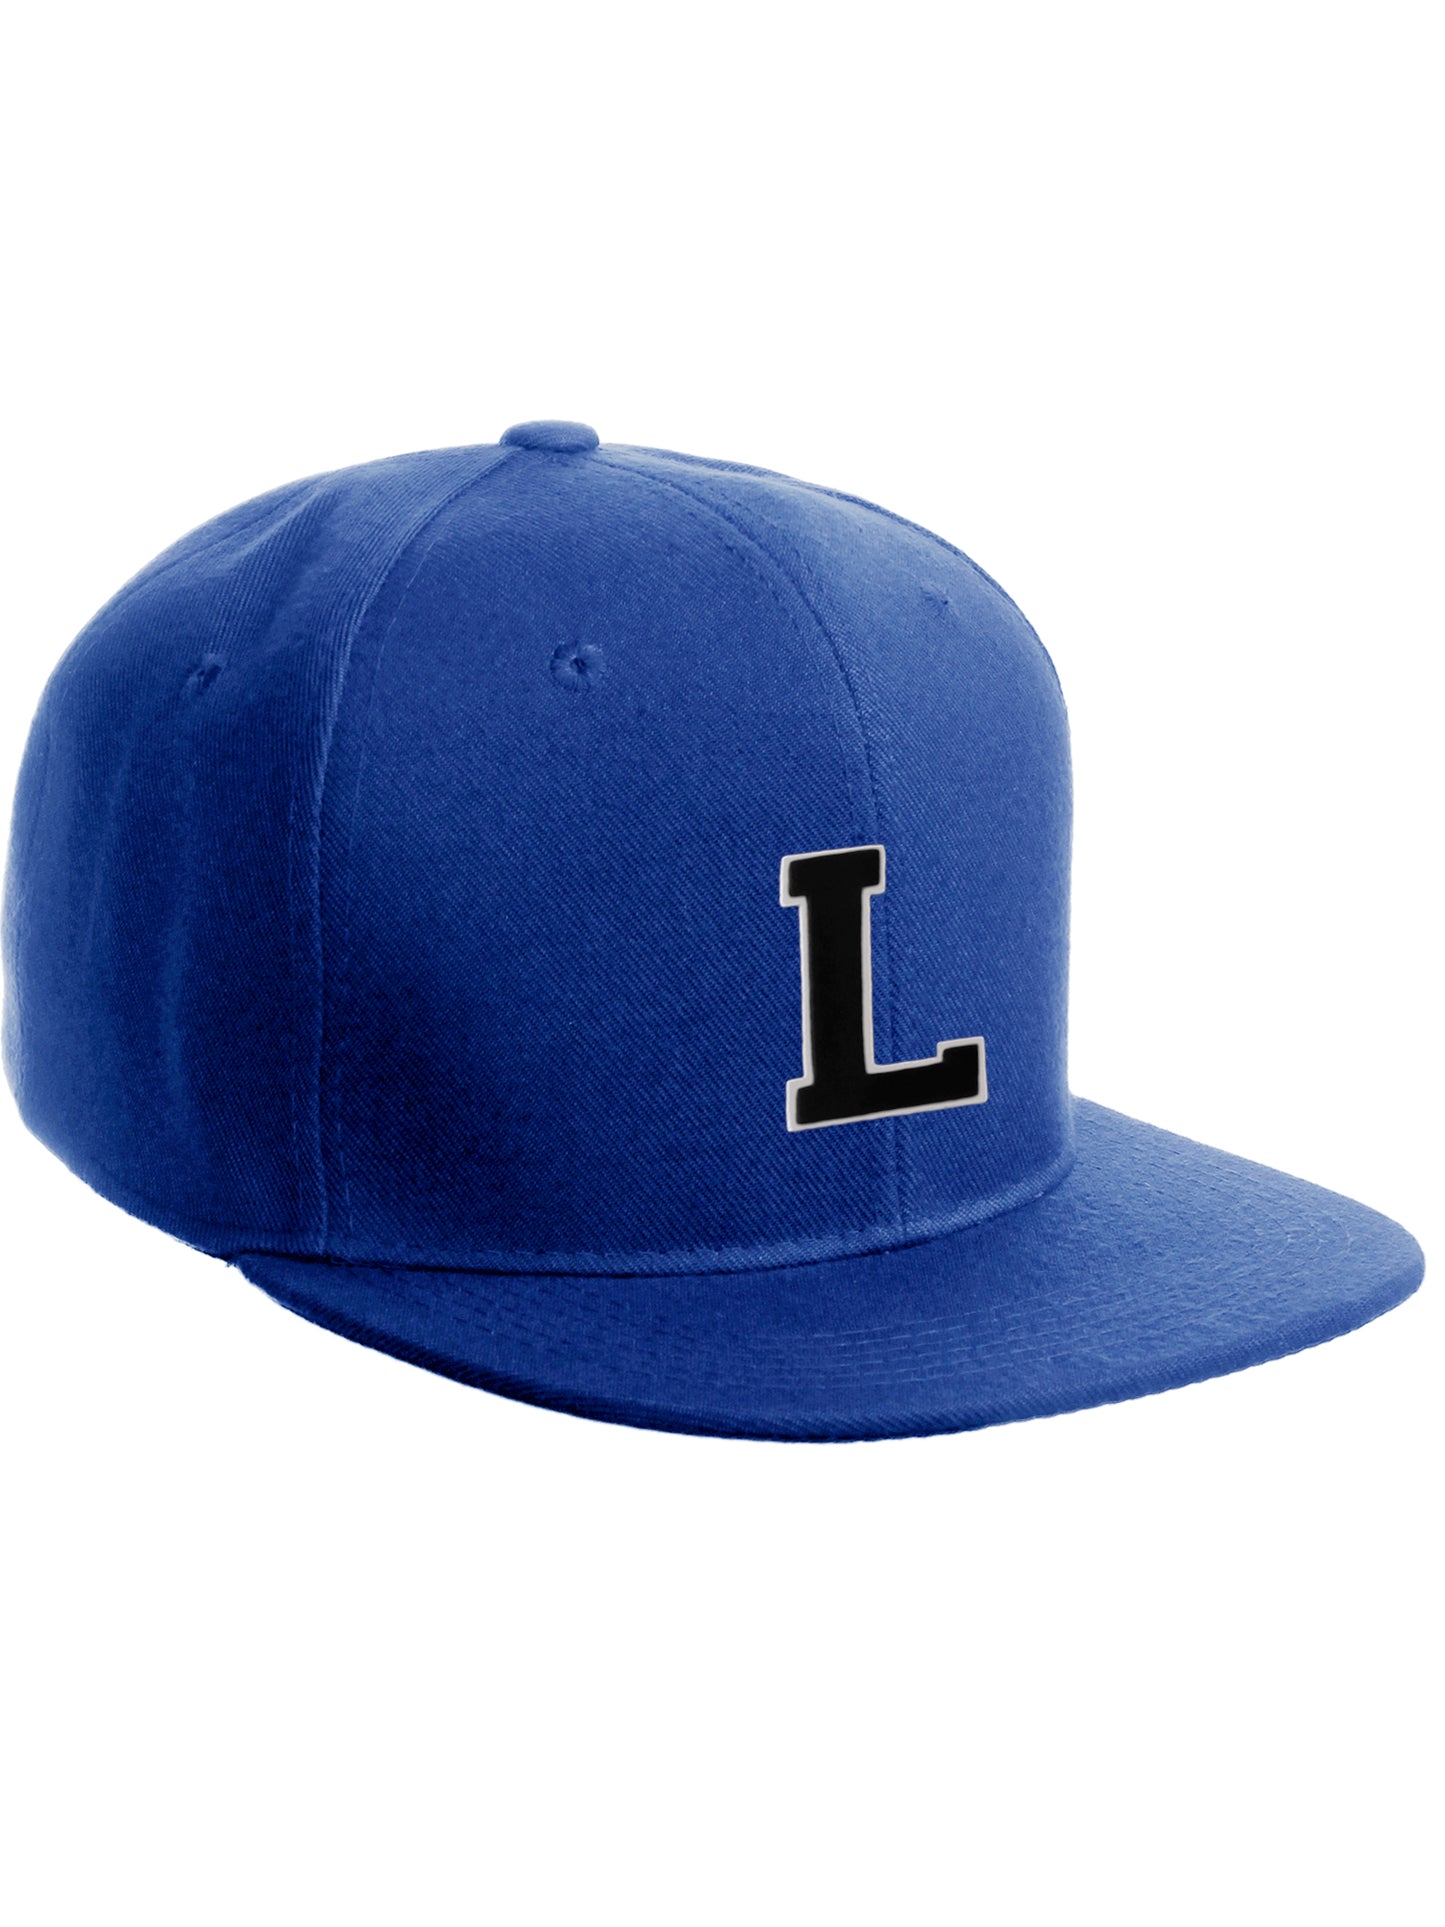 Classic Snapback Hat Custom A to Z Initial Letters, Royal Cap White Black